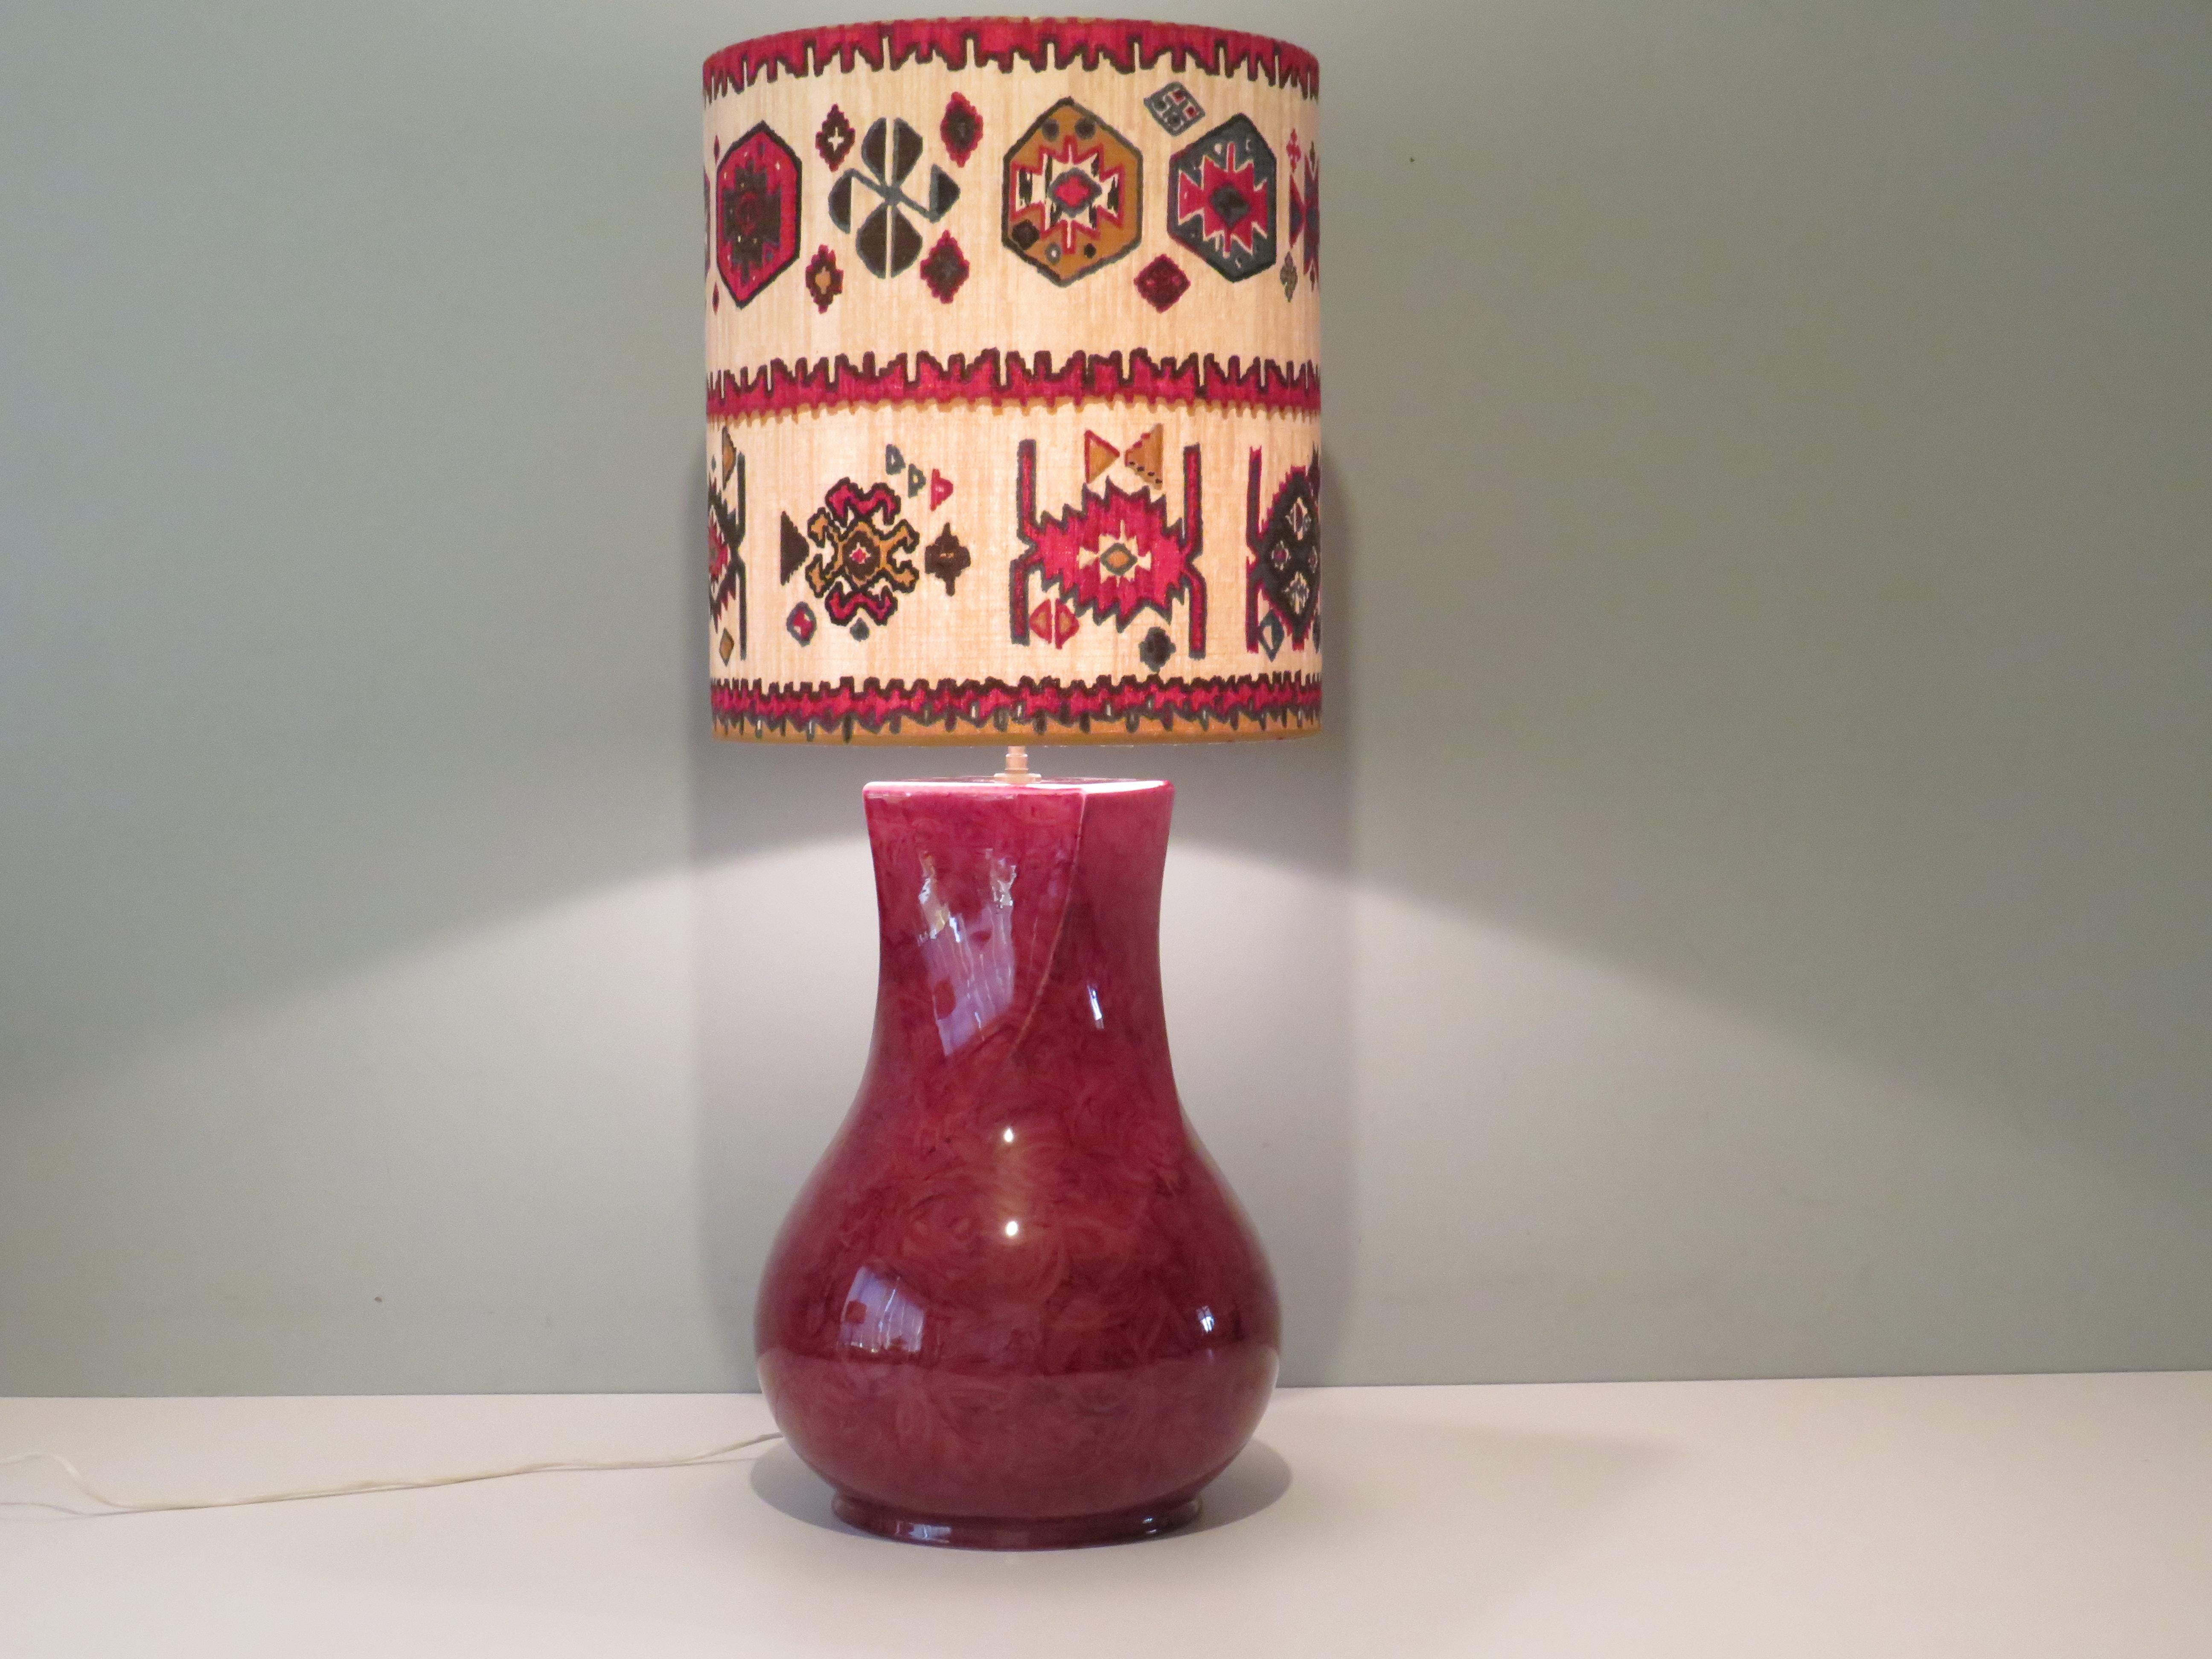 The vintage lamp base from Kostka, France has a red-black glaze layer and a round base that is twisted into a square top surface. The custom-made lampshade is made of a vintage ikat fabric.
The total height of the table lamp is 84 cm.
The lamp